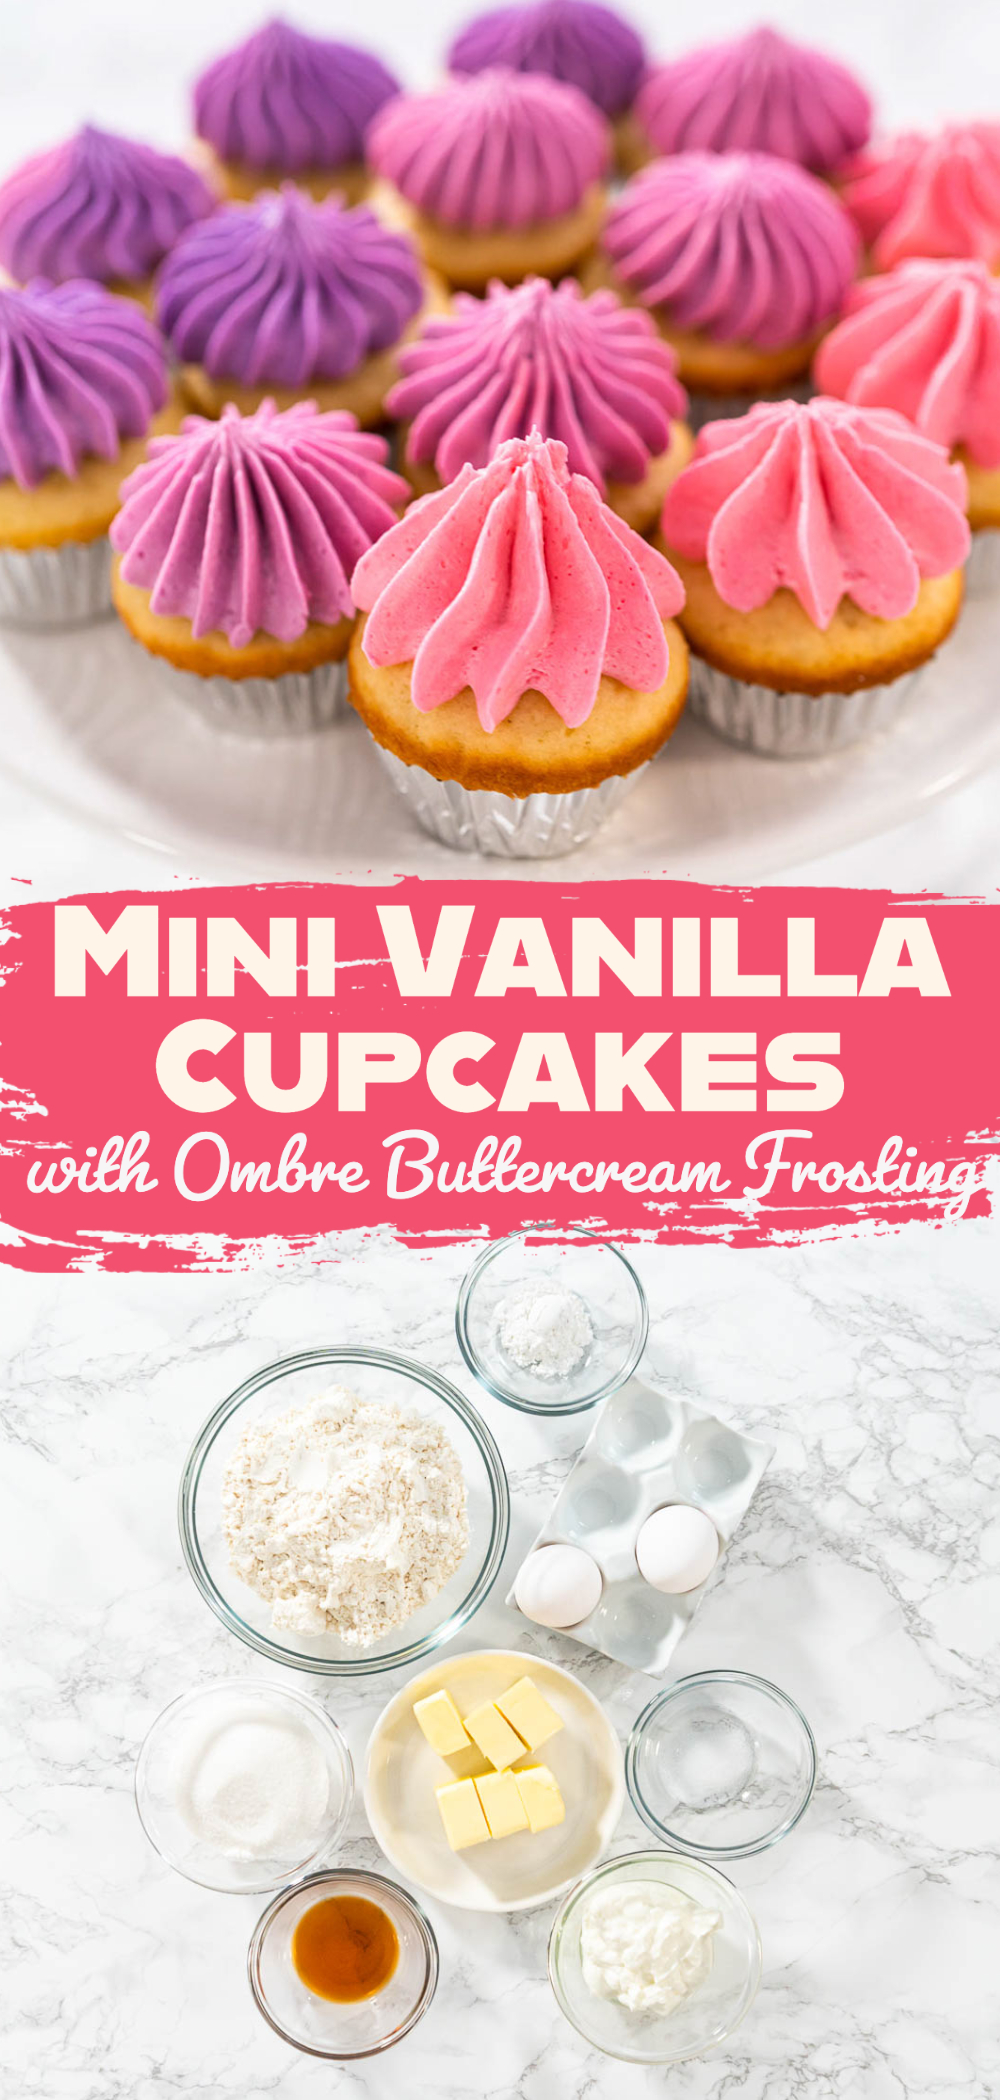 Mini Vanilla Cupcakes with Ombre Buttercream Frosting